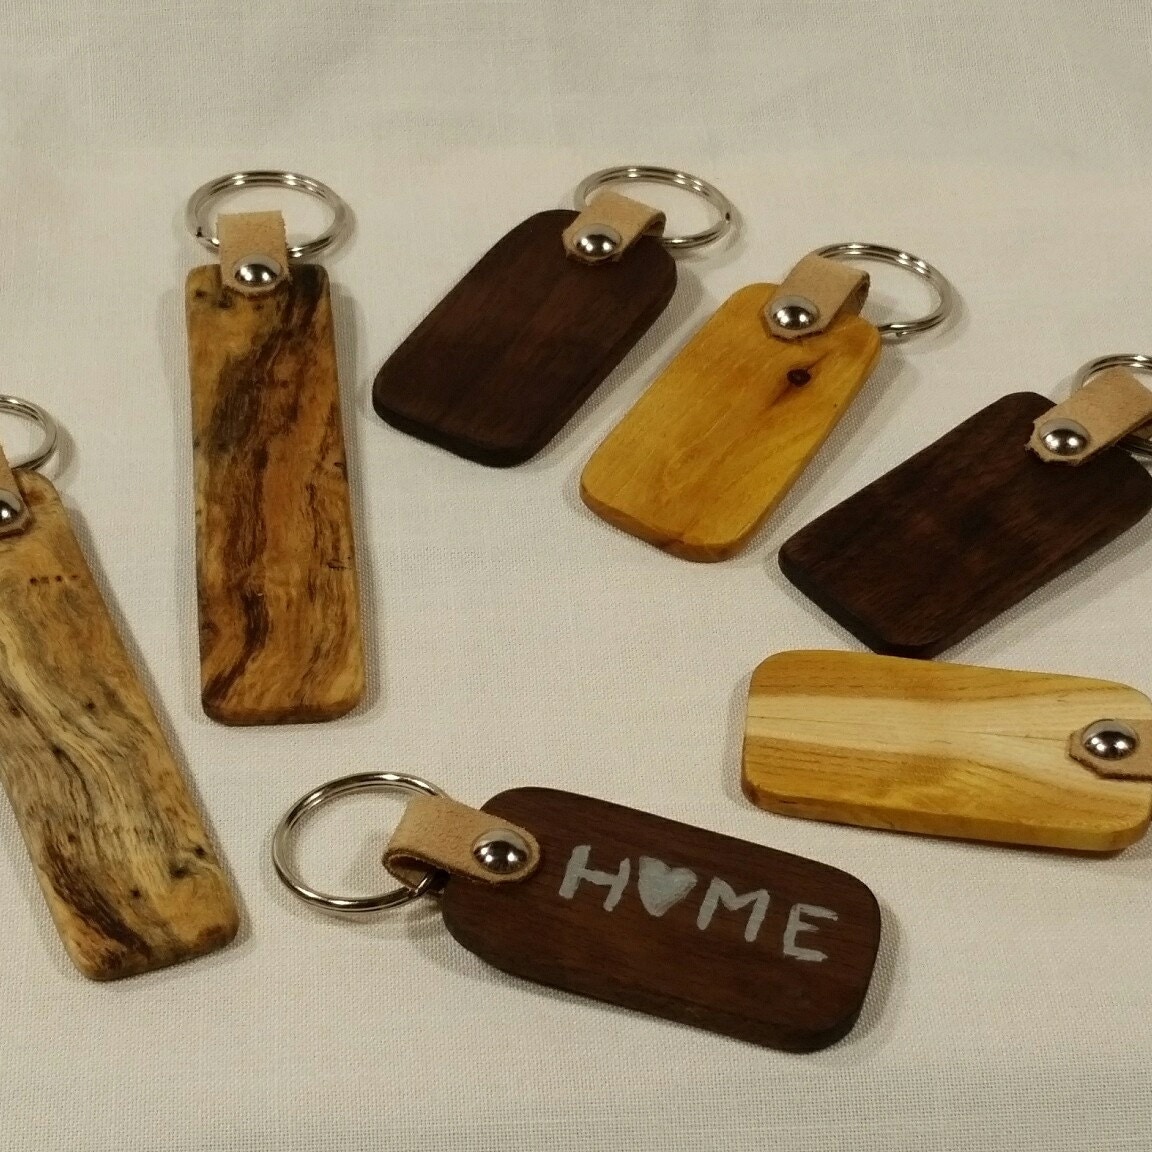 Keychains available at Etsy.